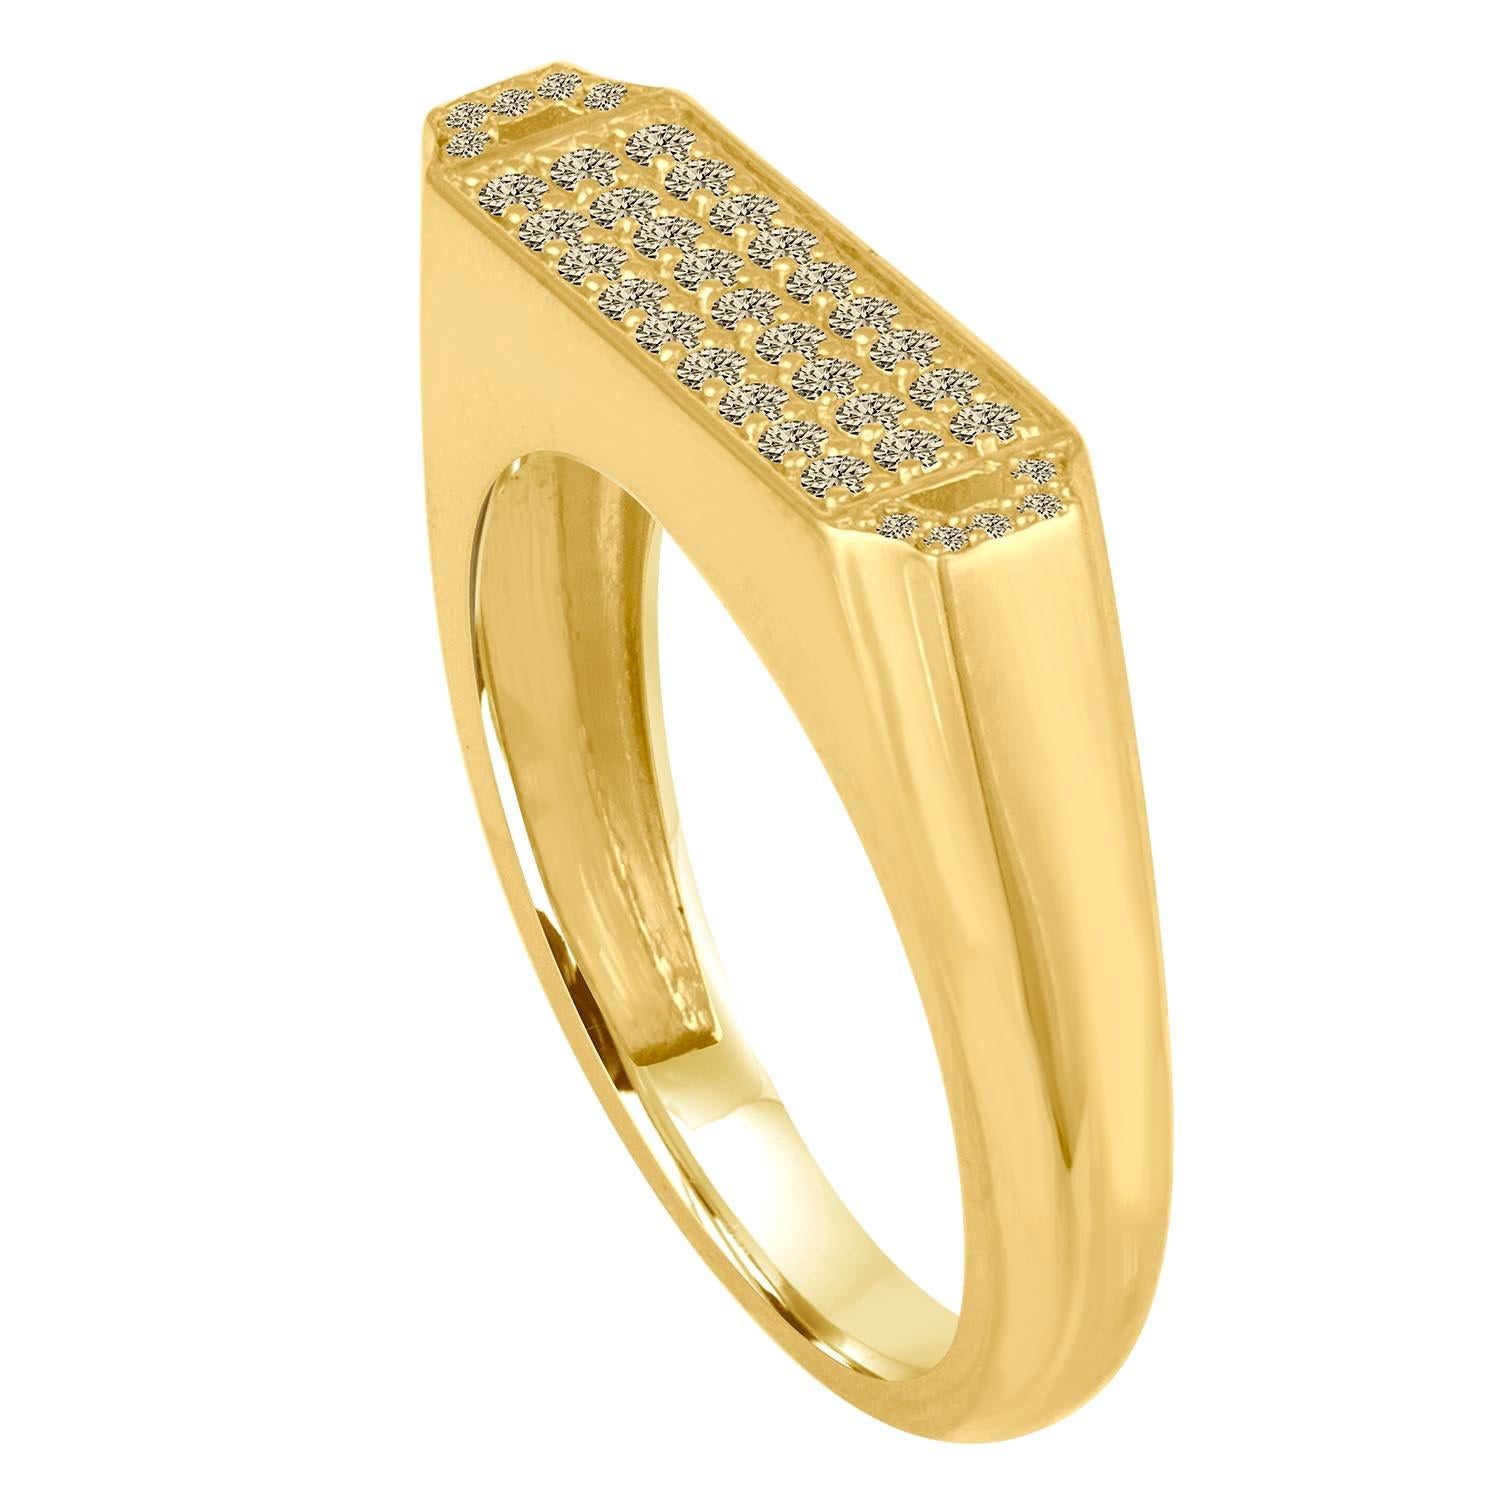 Modern and sleek 18 Karat Gold and Champagne Diamond Signet Ring which can be worn alone or stacked in pairs.  Art Deco influence can be seen in this elongated shape.  
Materials: 18 karat gold, .09mm, 1.3mm champagne diamonds (0.30ct)
Measuring